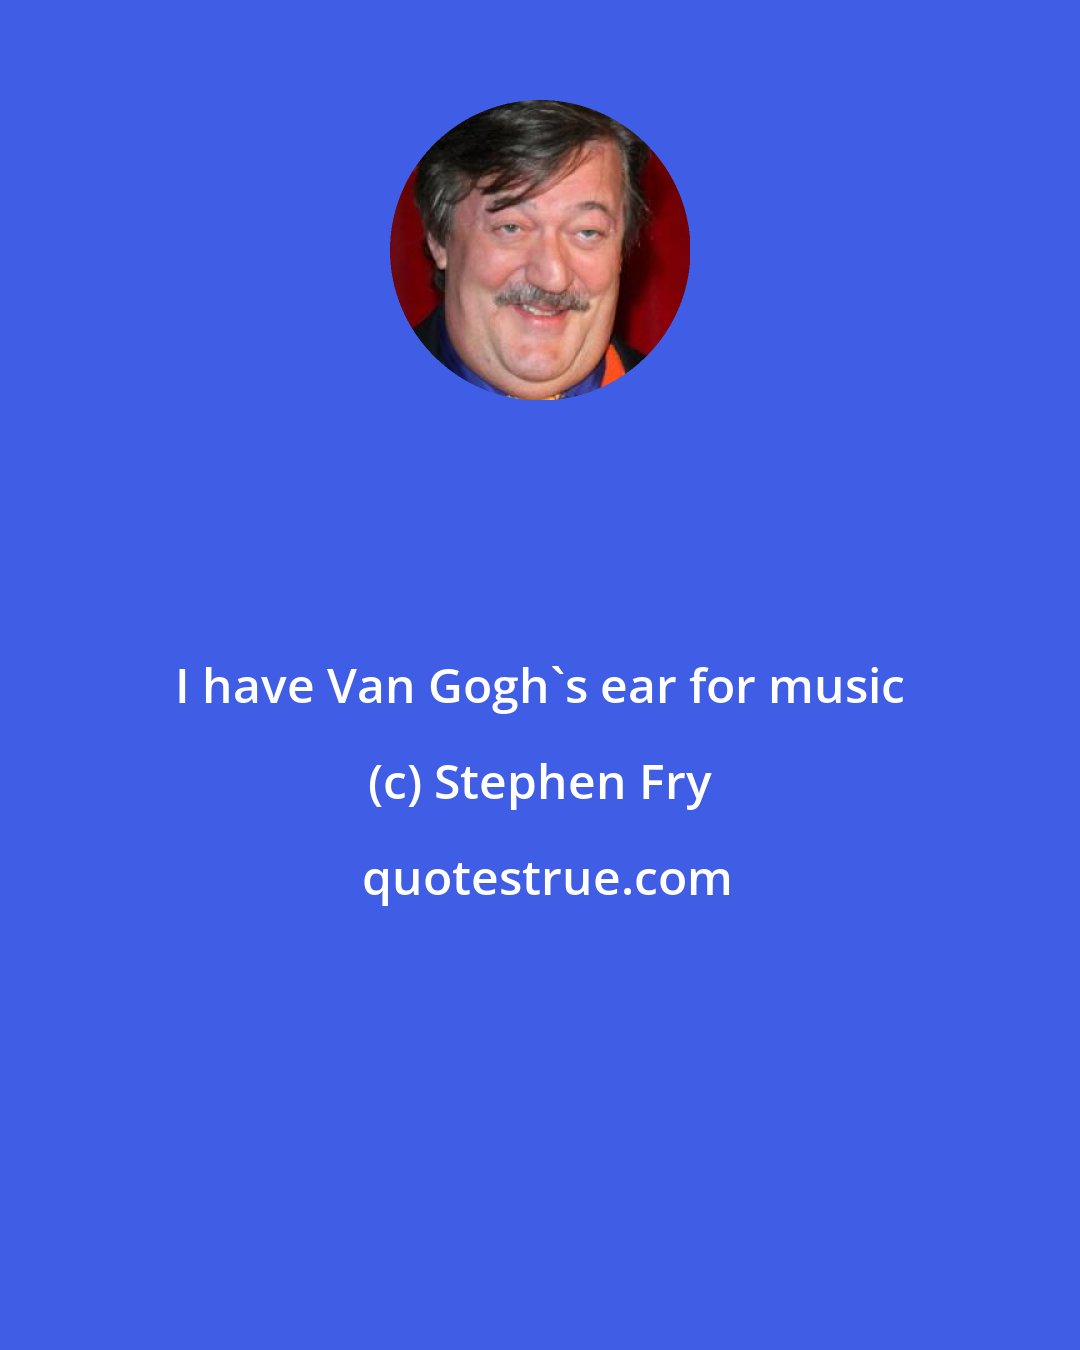 Stephen Fry: I have Van Gogh's ear for music